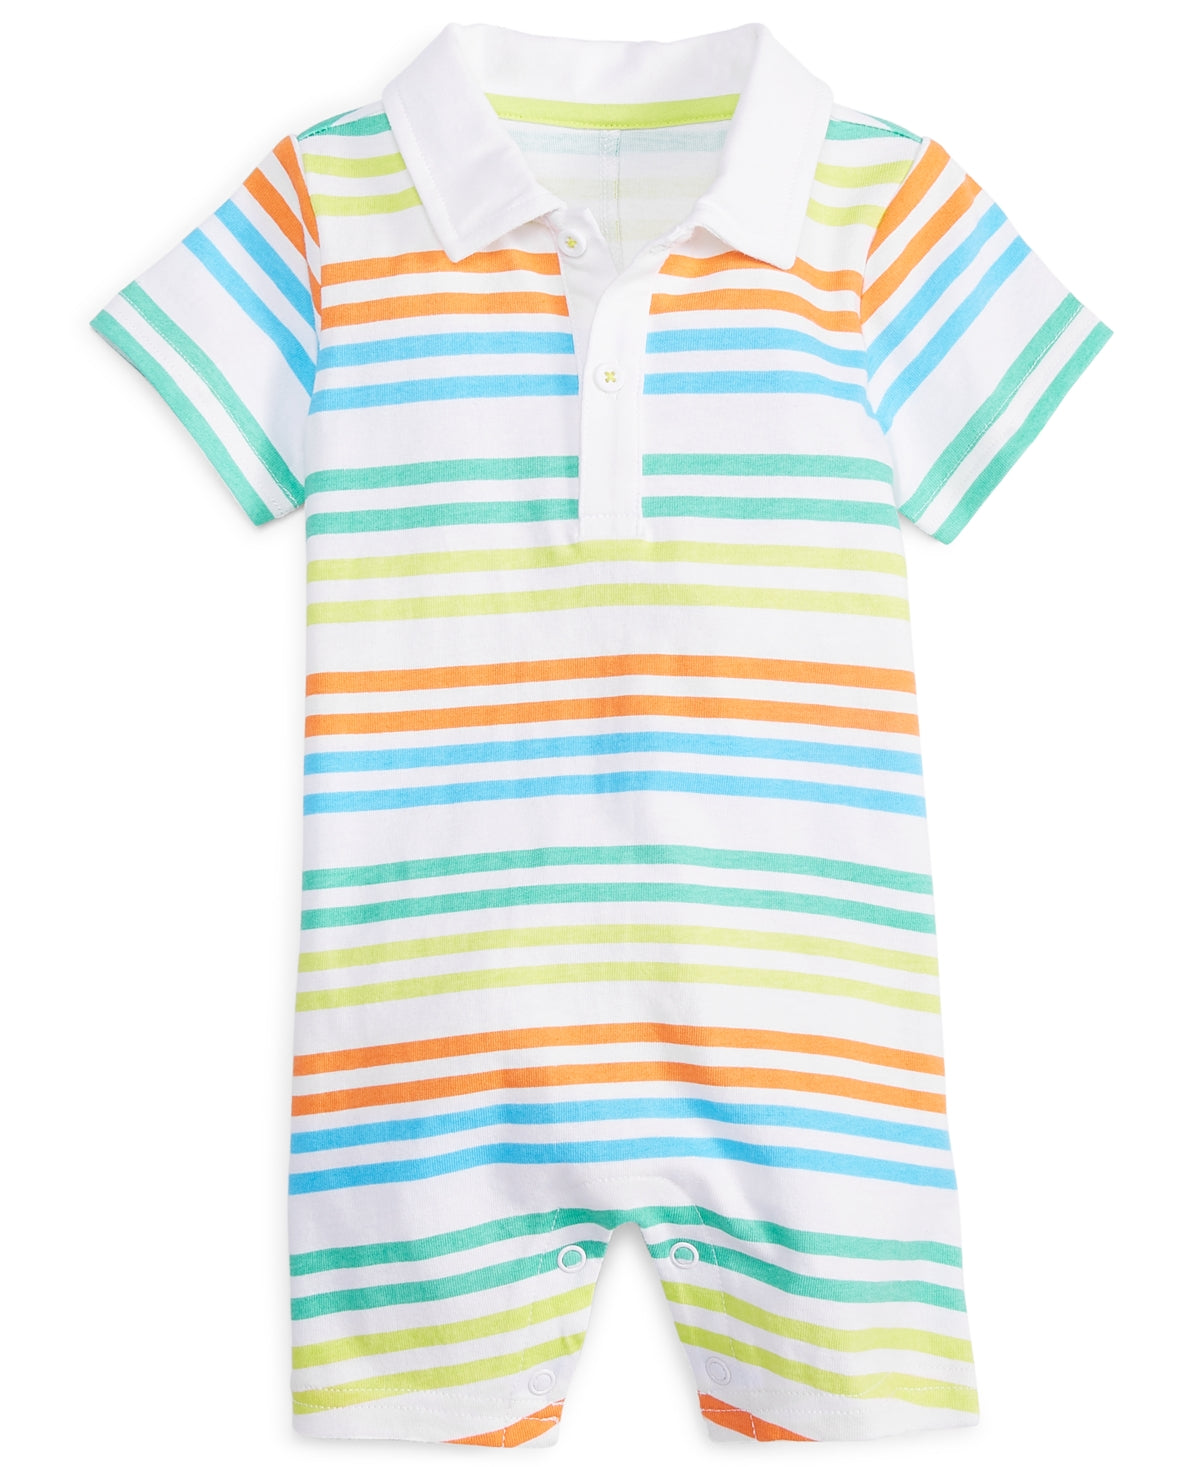 First Impressions Baby Boys Newport Stripe Sunsuit Bright White 12 months